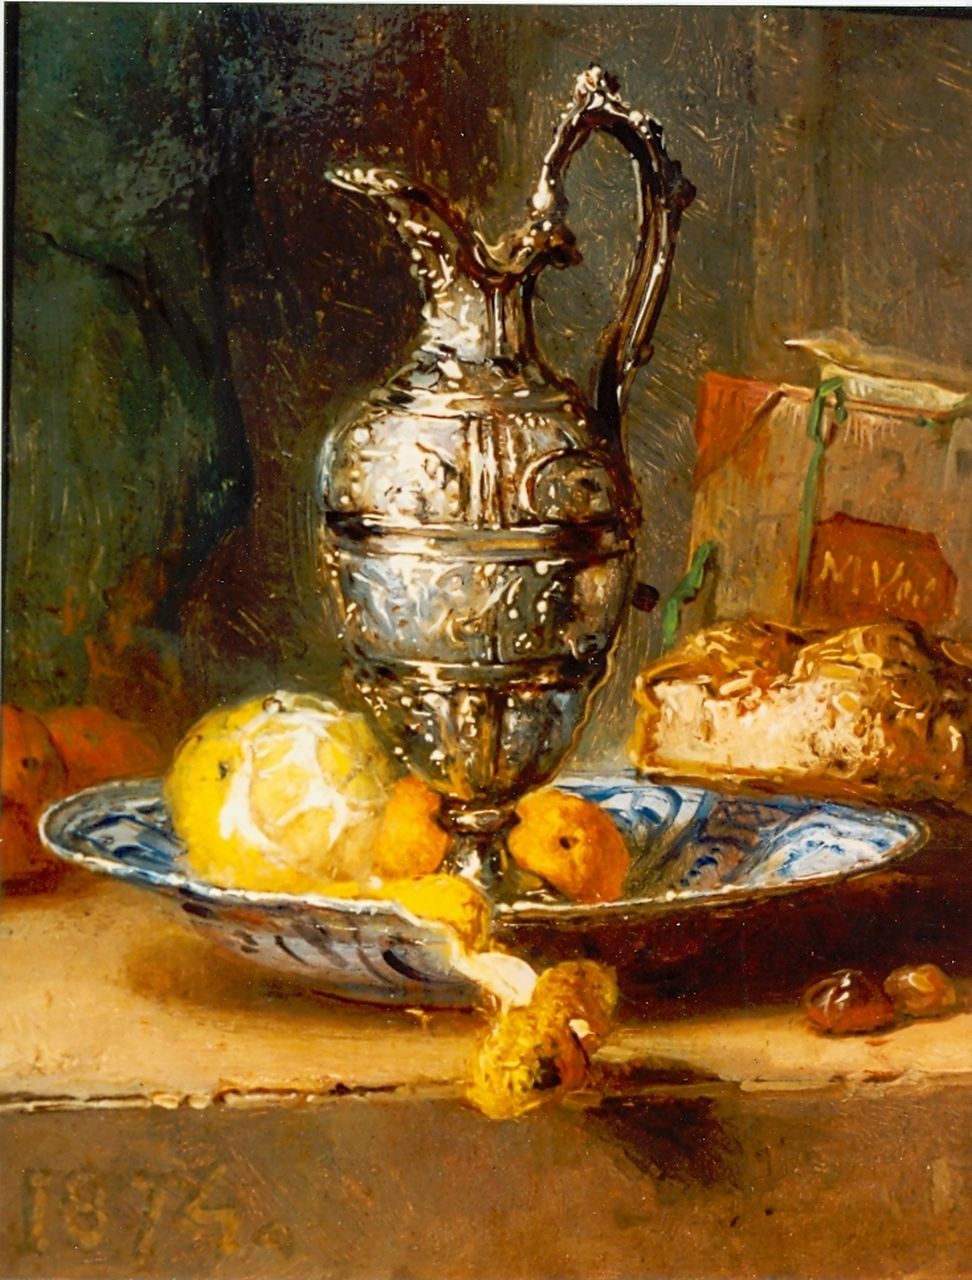 Vos M.  | Maria Vos, Still life with a silver vase, a peeled lemon on a wanli plate, oil on panel 14.0 x 11.5 cm, signed l.l. and dated 1874